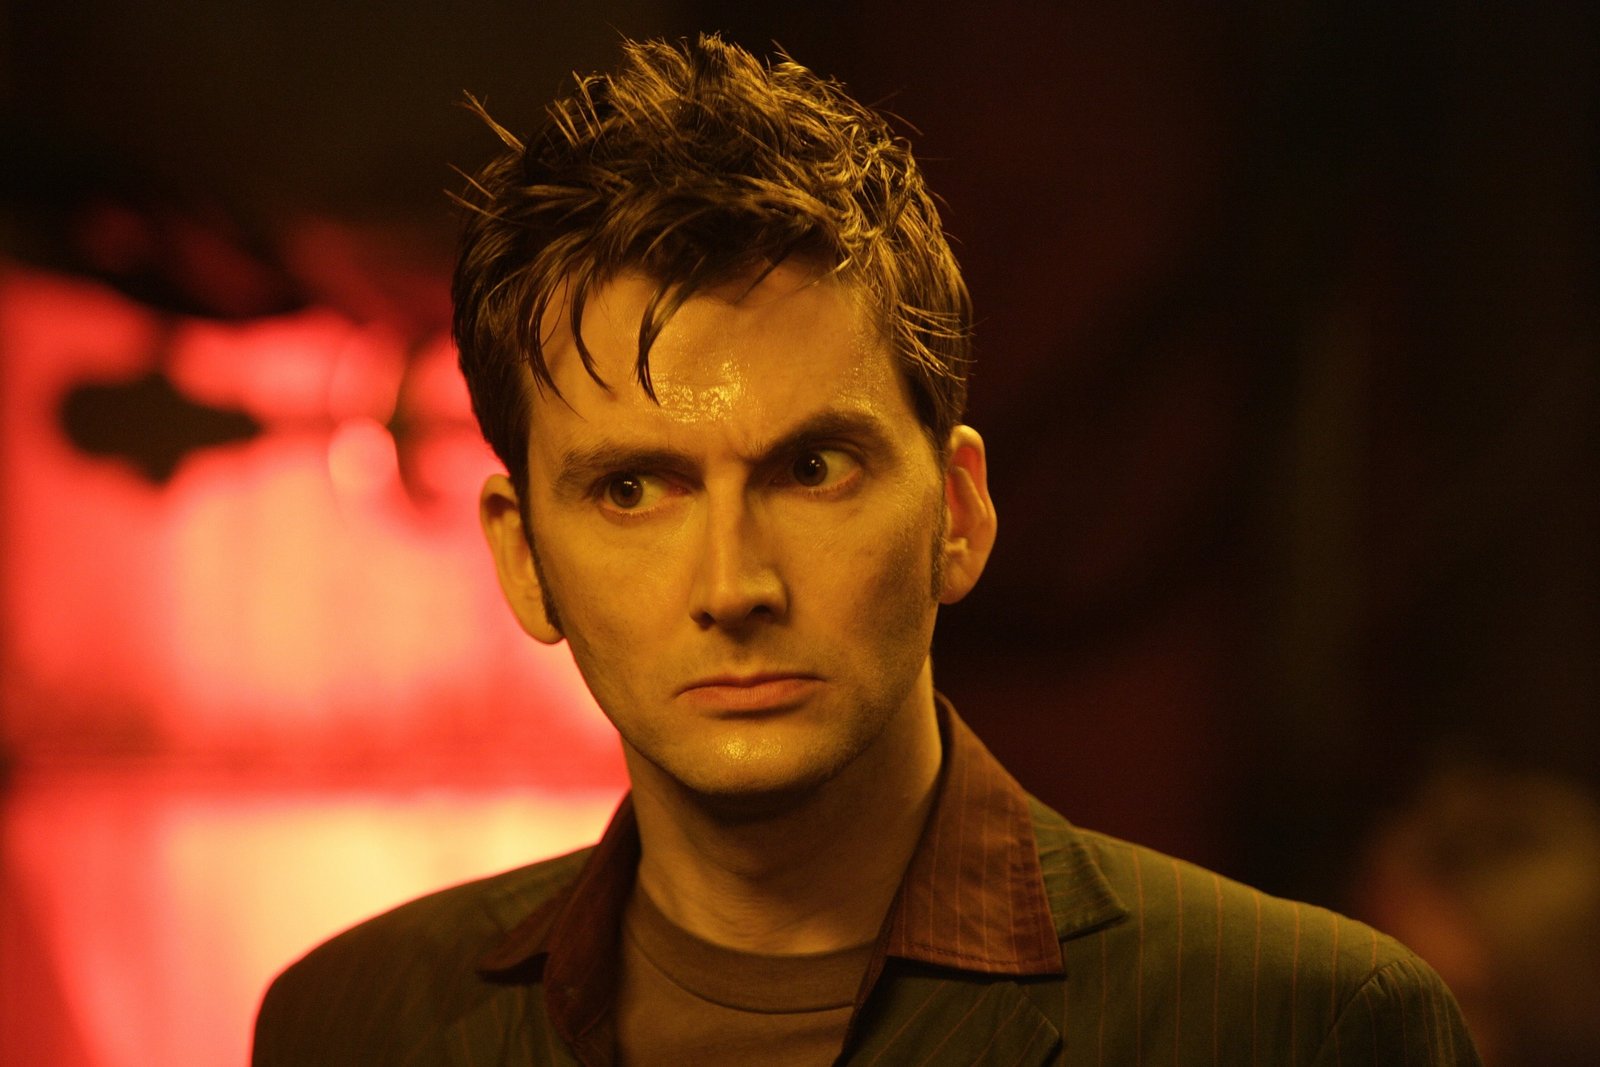 Good Starring David Tennant to Screen Across Cinemas as Part of National Theatre Live Event